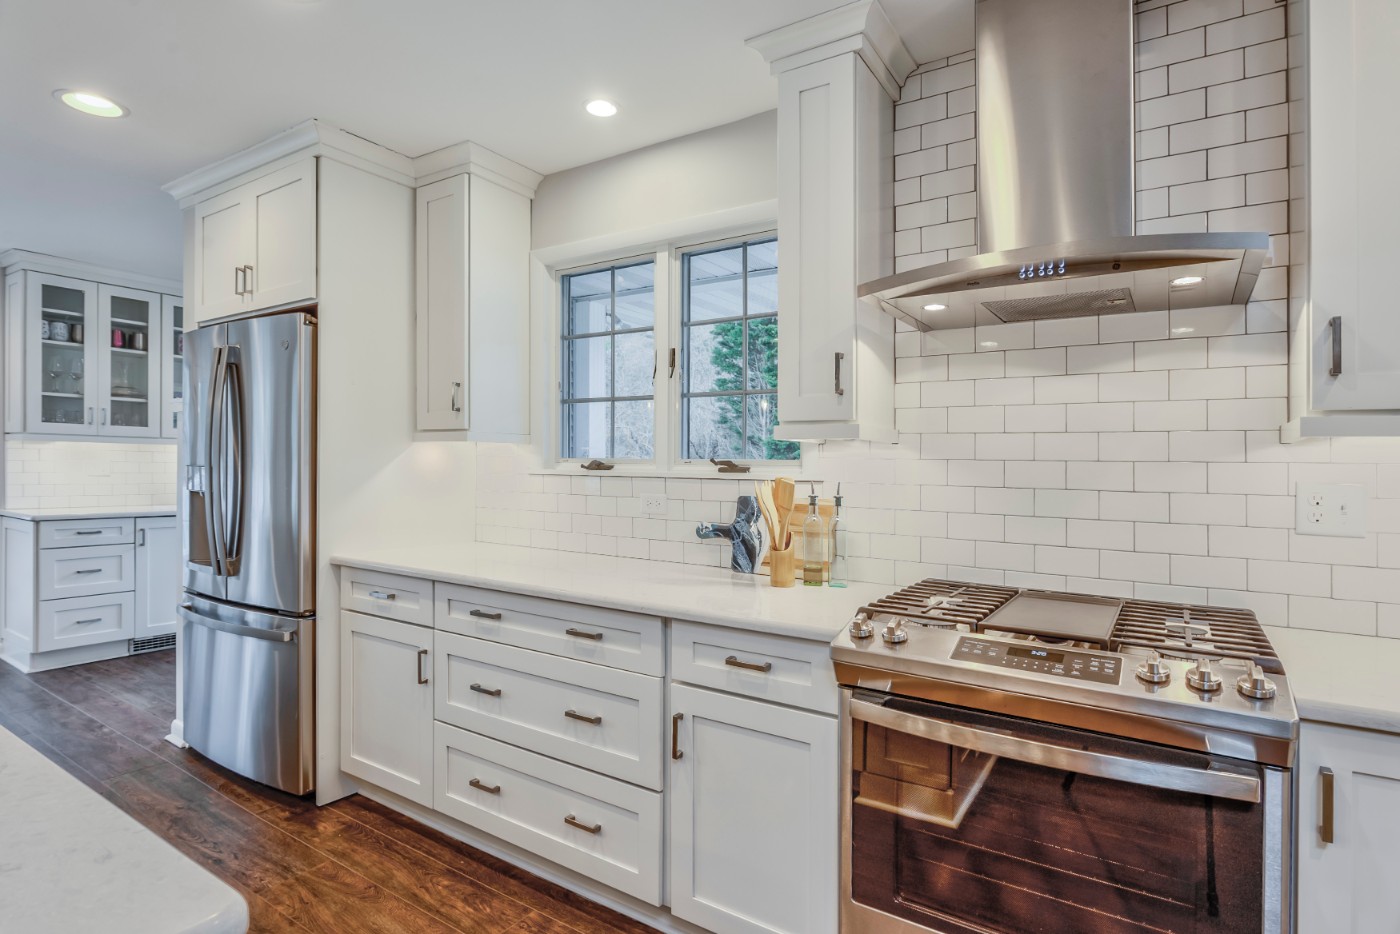 Canal Way Renovation in Bethany Beach DE - Kitchen with Brushed Stainless Steel Appliances